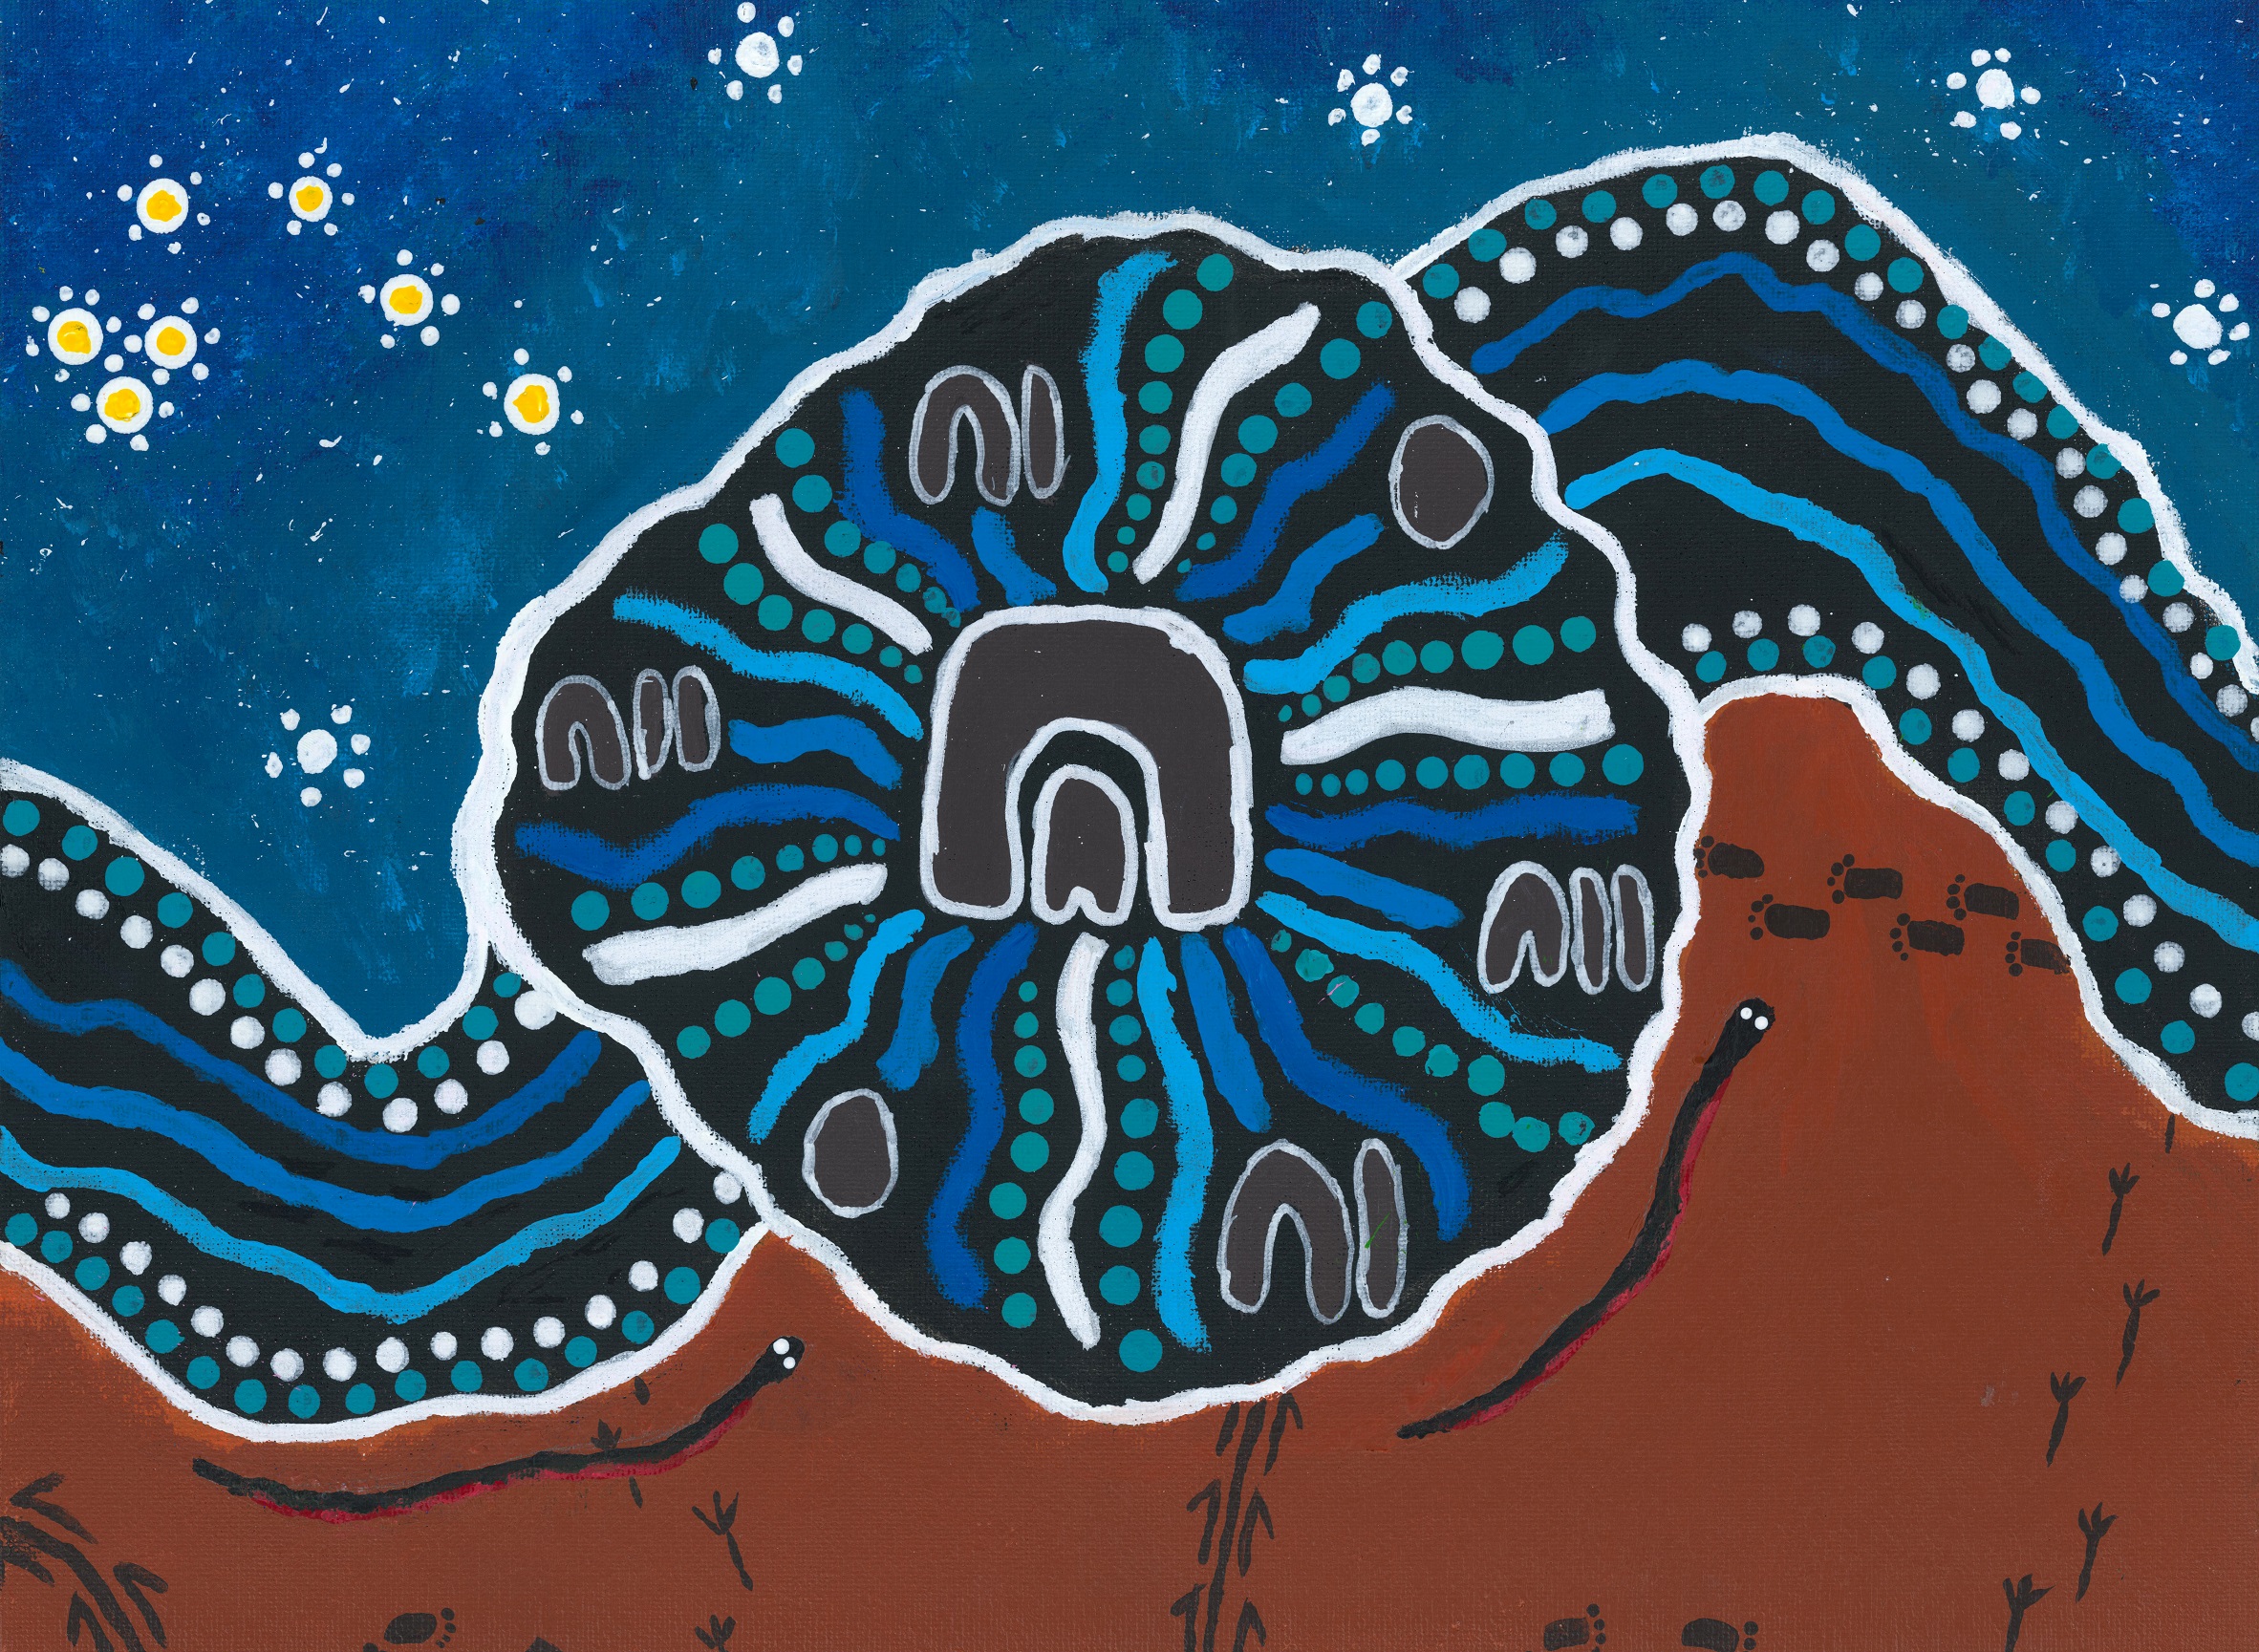 Aboriginal artwork depicting Ancestors from the Seven Sisters Kokatha Dreaming and the passing of wisdom